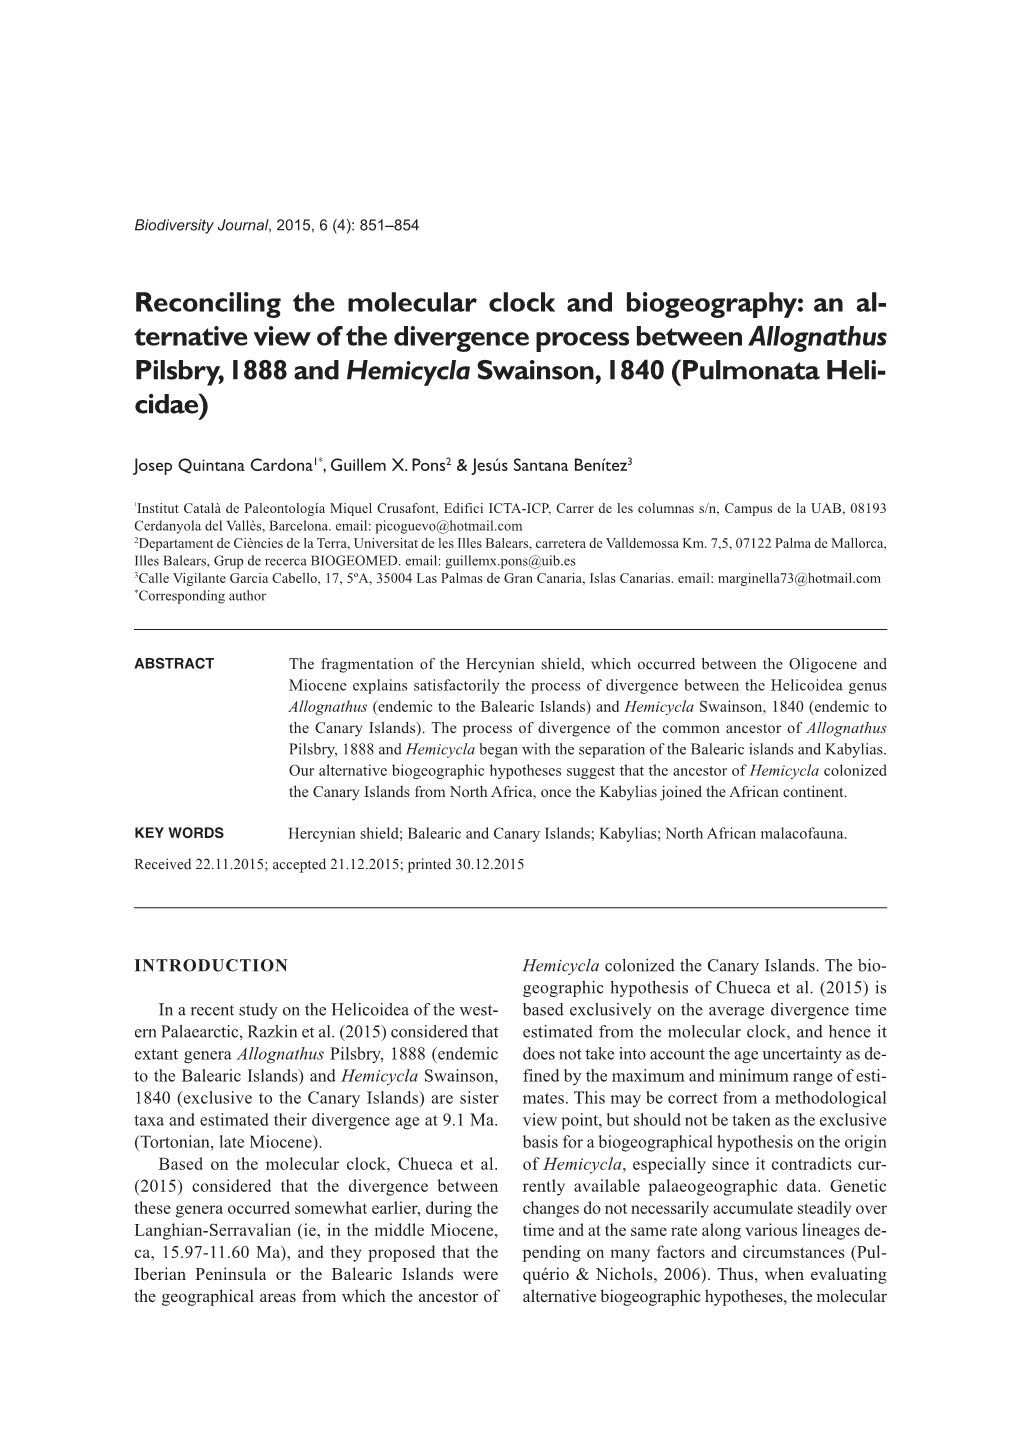 Reconciling the Molecular Clock and Biogeography: an Al- Ternative View of the Divergence Process Between Allognathus Pilsbry, 1